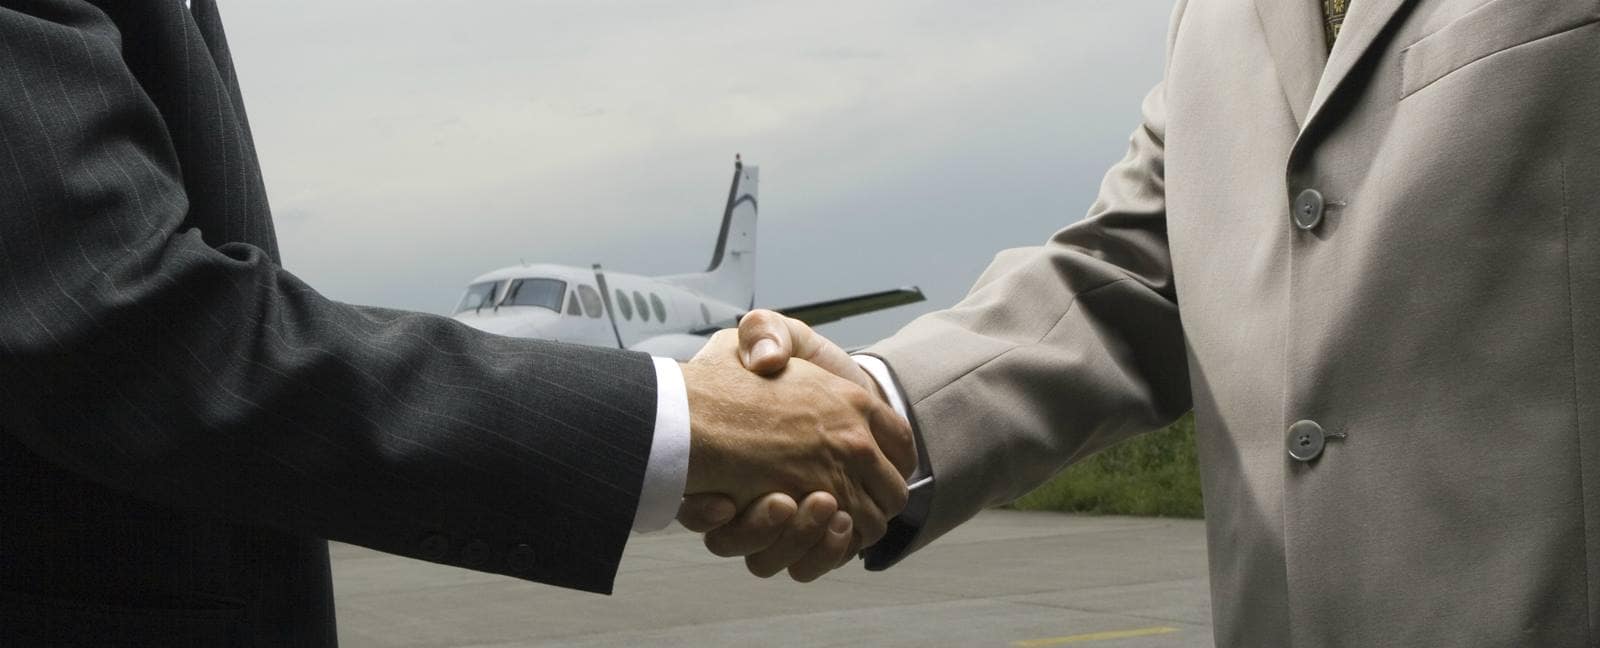 two men shaking hands at an airport